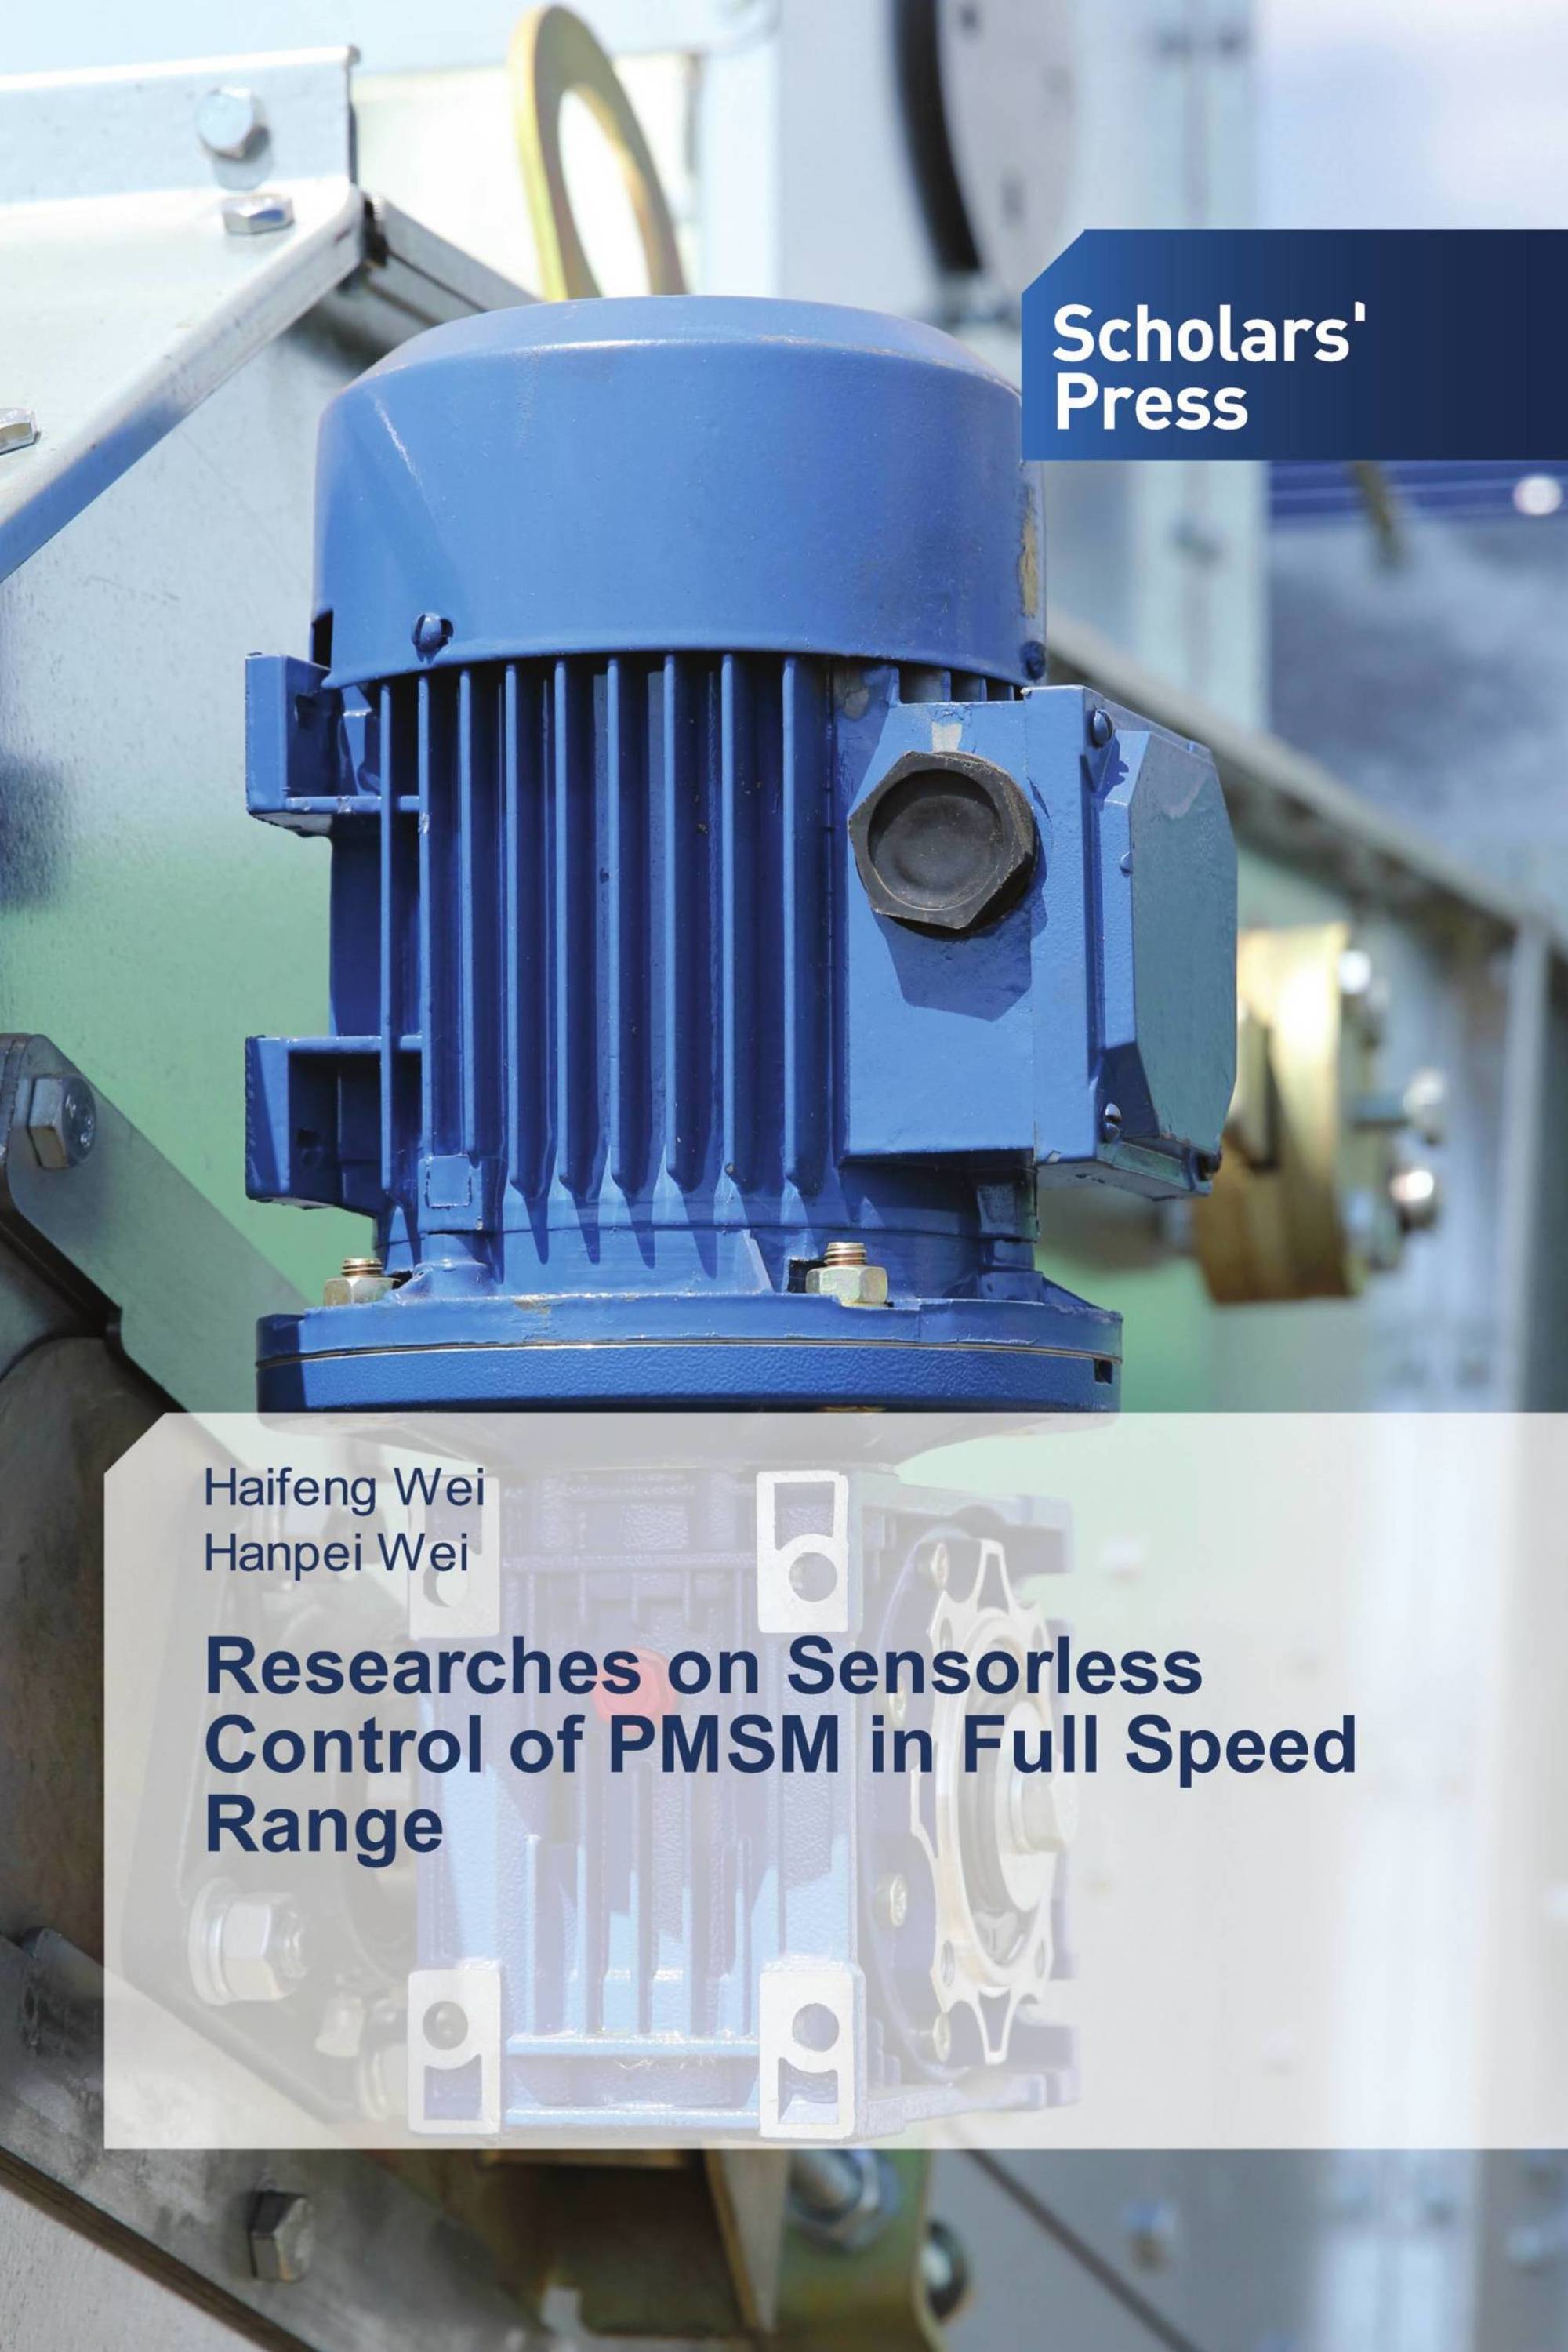 Researches on Sensorless Control of PMSM in Full Speed Range